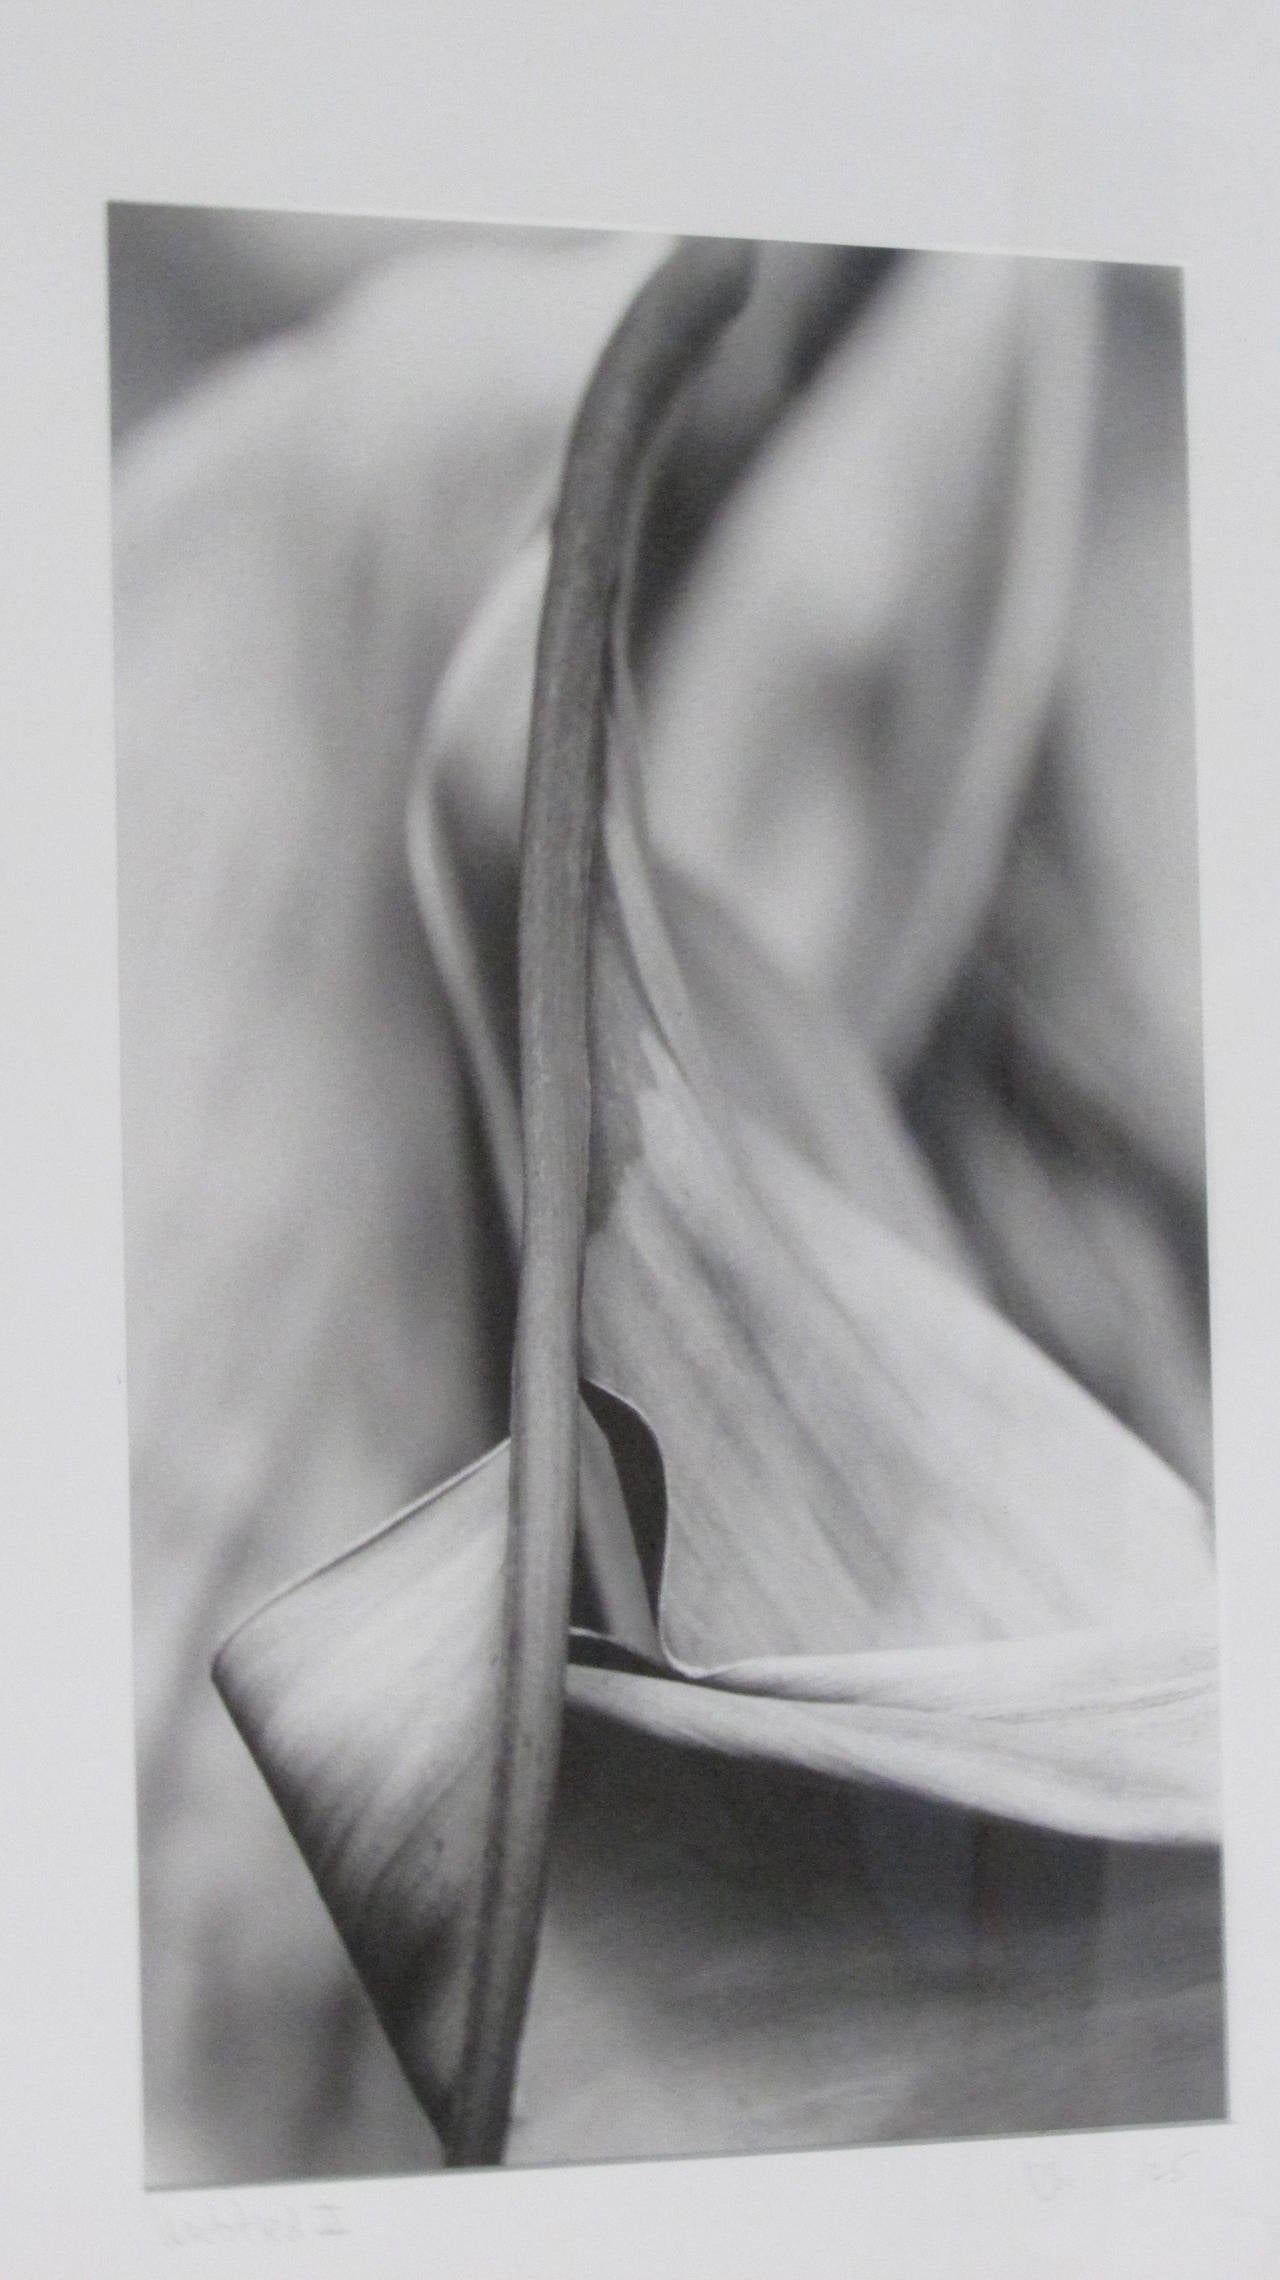 A grouping of four sensual black and white flora & fauna photographs reminiscent of the flower photography of Robert Mapplethorpe. Each is pencil signed in matting with artist initials / titled and numbered 1/25. Exceptionally beautiful.